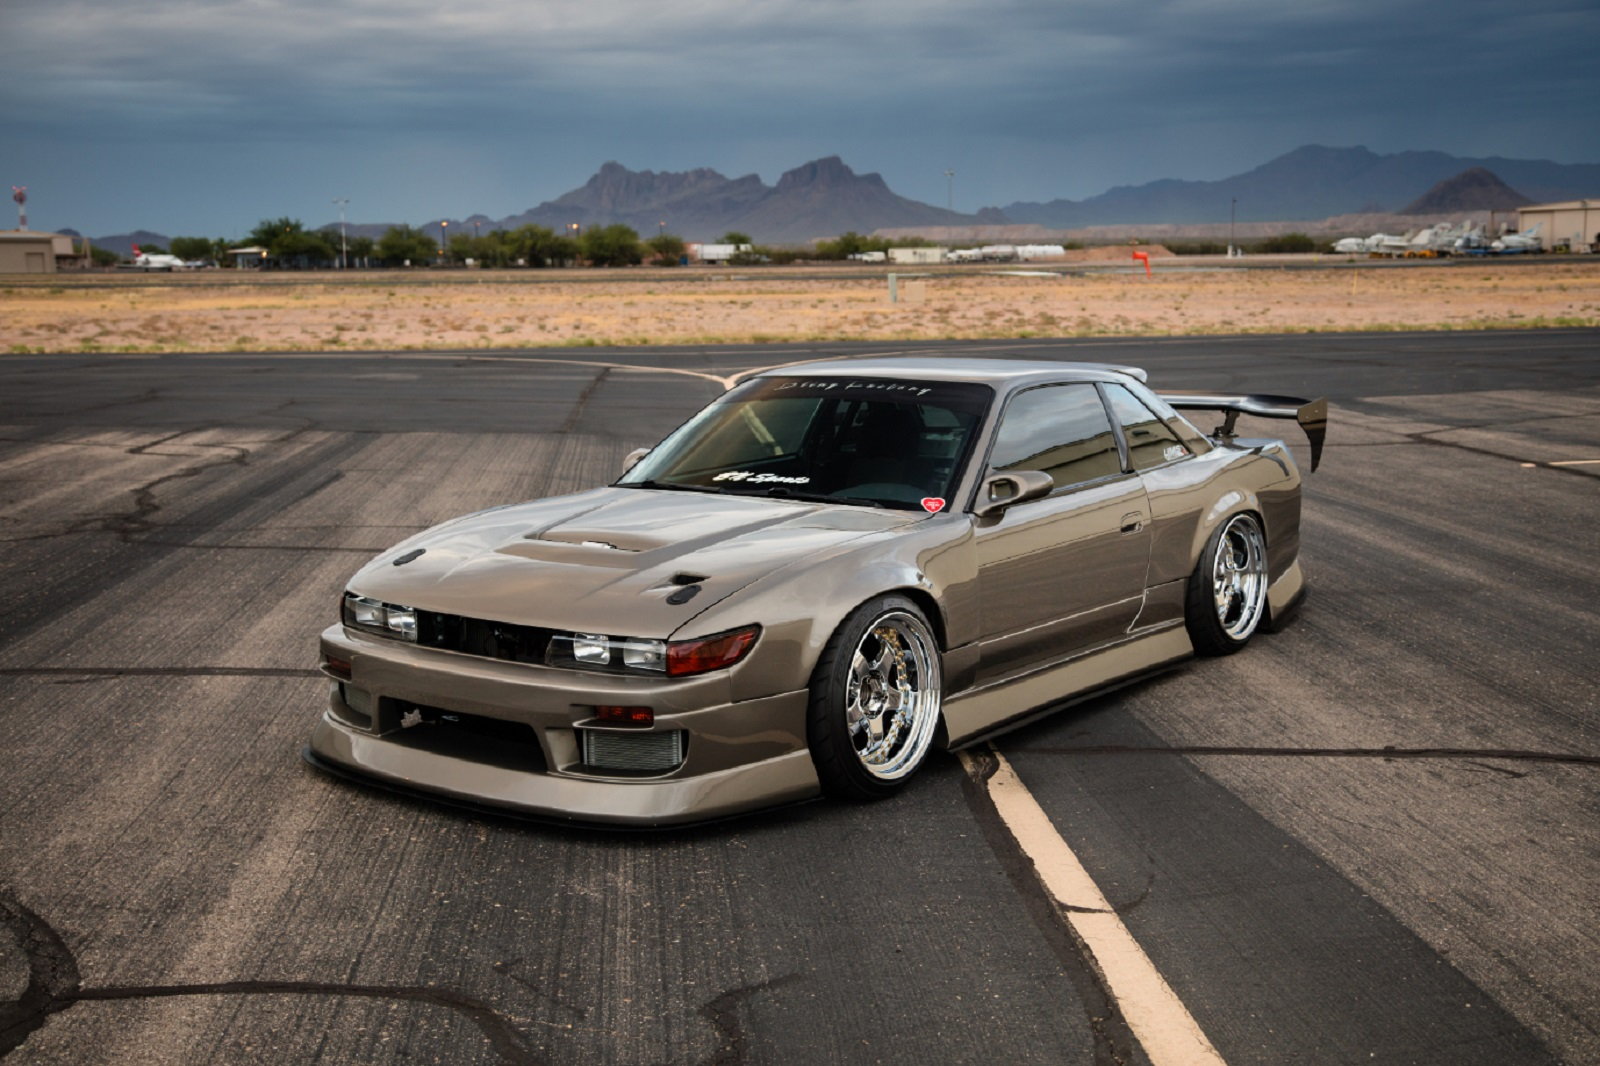 1989 Nissan 240SX with S13 Silvia front and LS7 GM V8  tuningblogeu